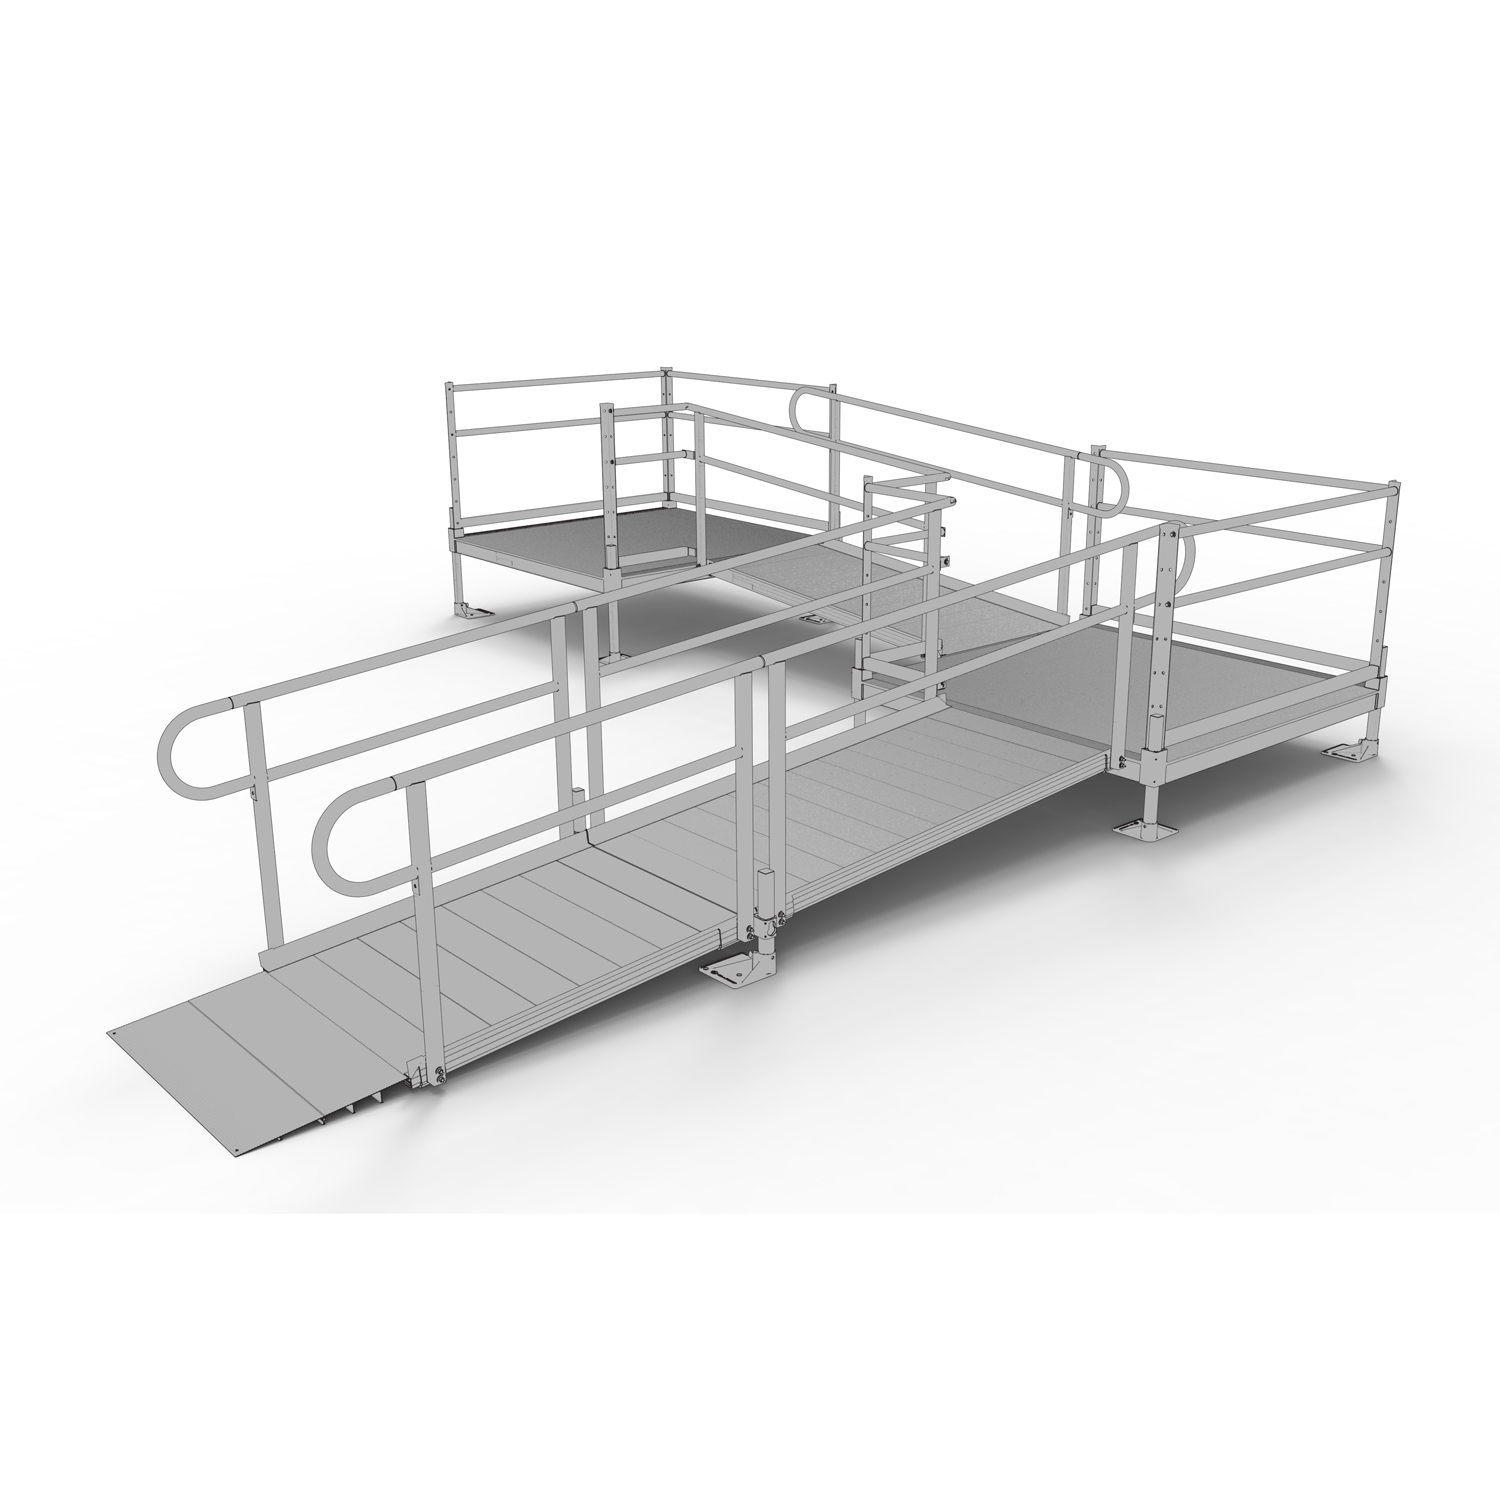 EZ-ACCESS PATHWAY® 3G Ramp Kit (L SHAPED with 5' TOP AND TURN PLATFORMS)